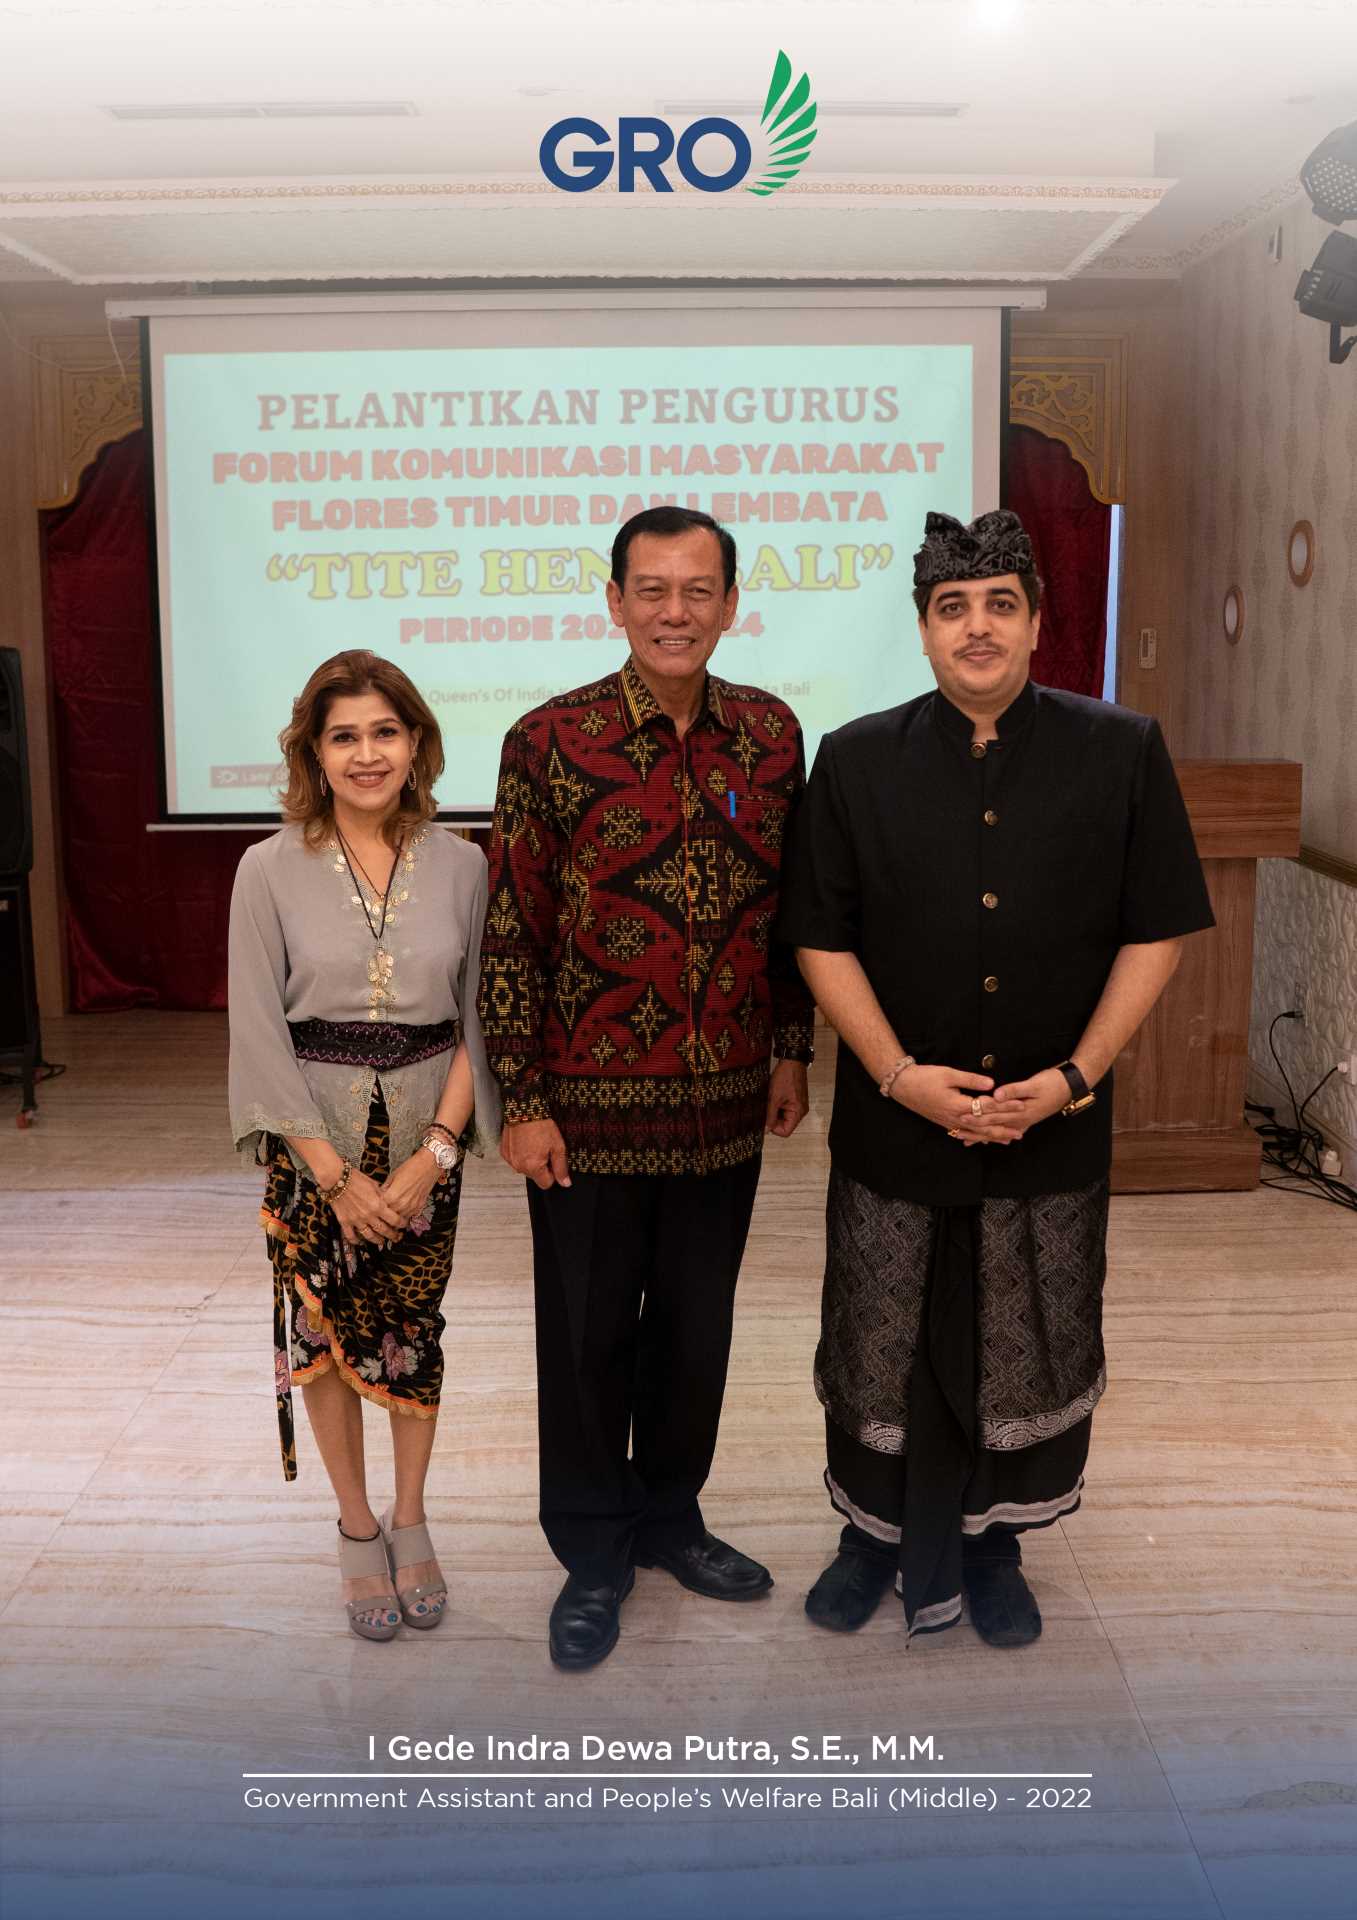 I Gede Indra Dewa Putra, S.E., M.M. is the Goverment Assistant and People's Welfare Bali (Middle) - 2022